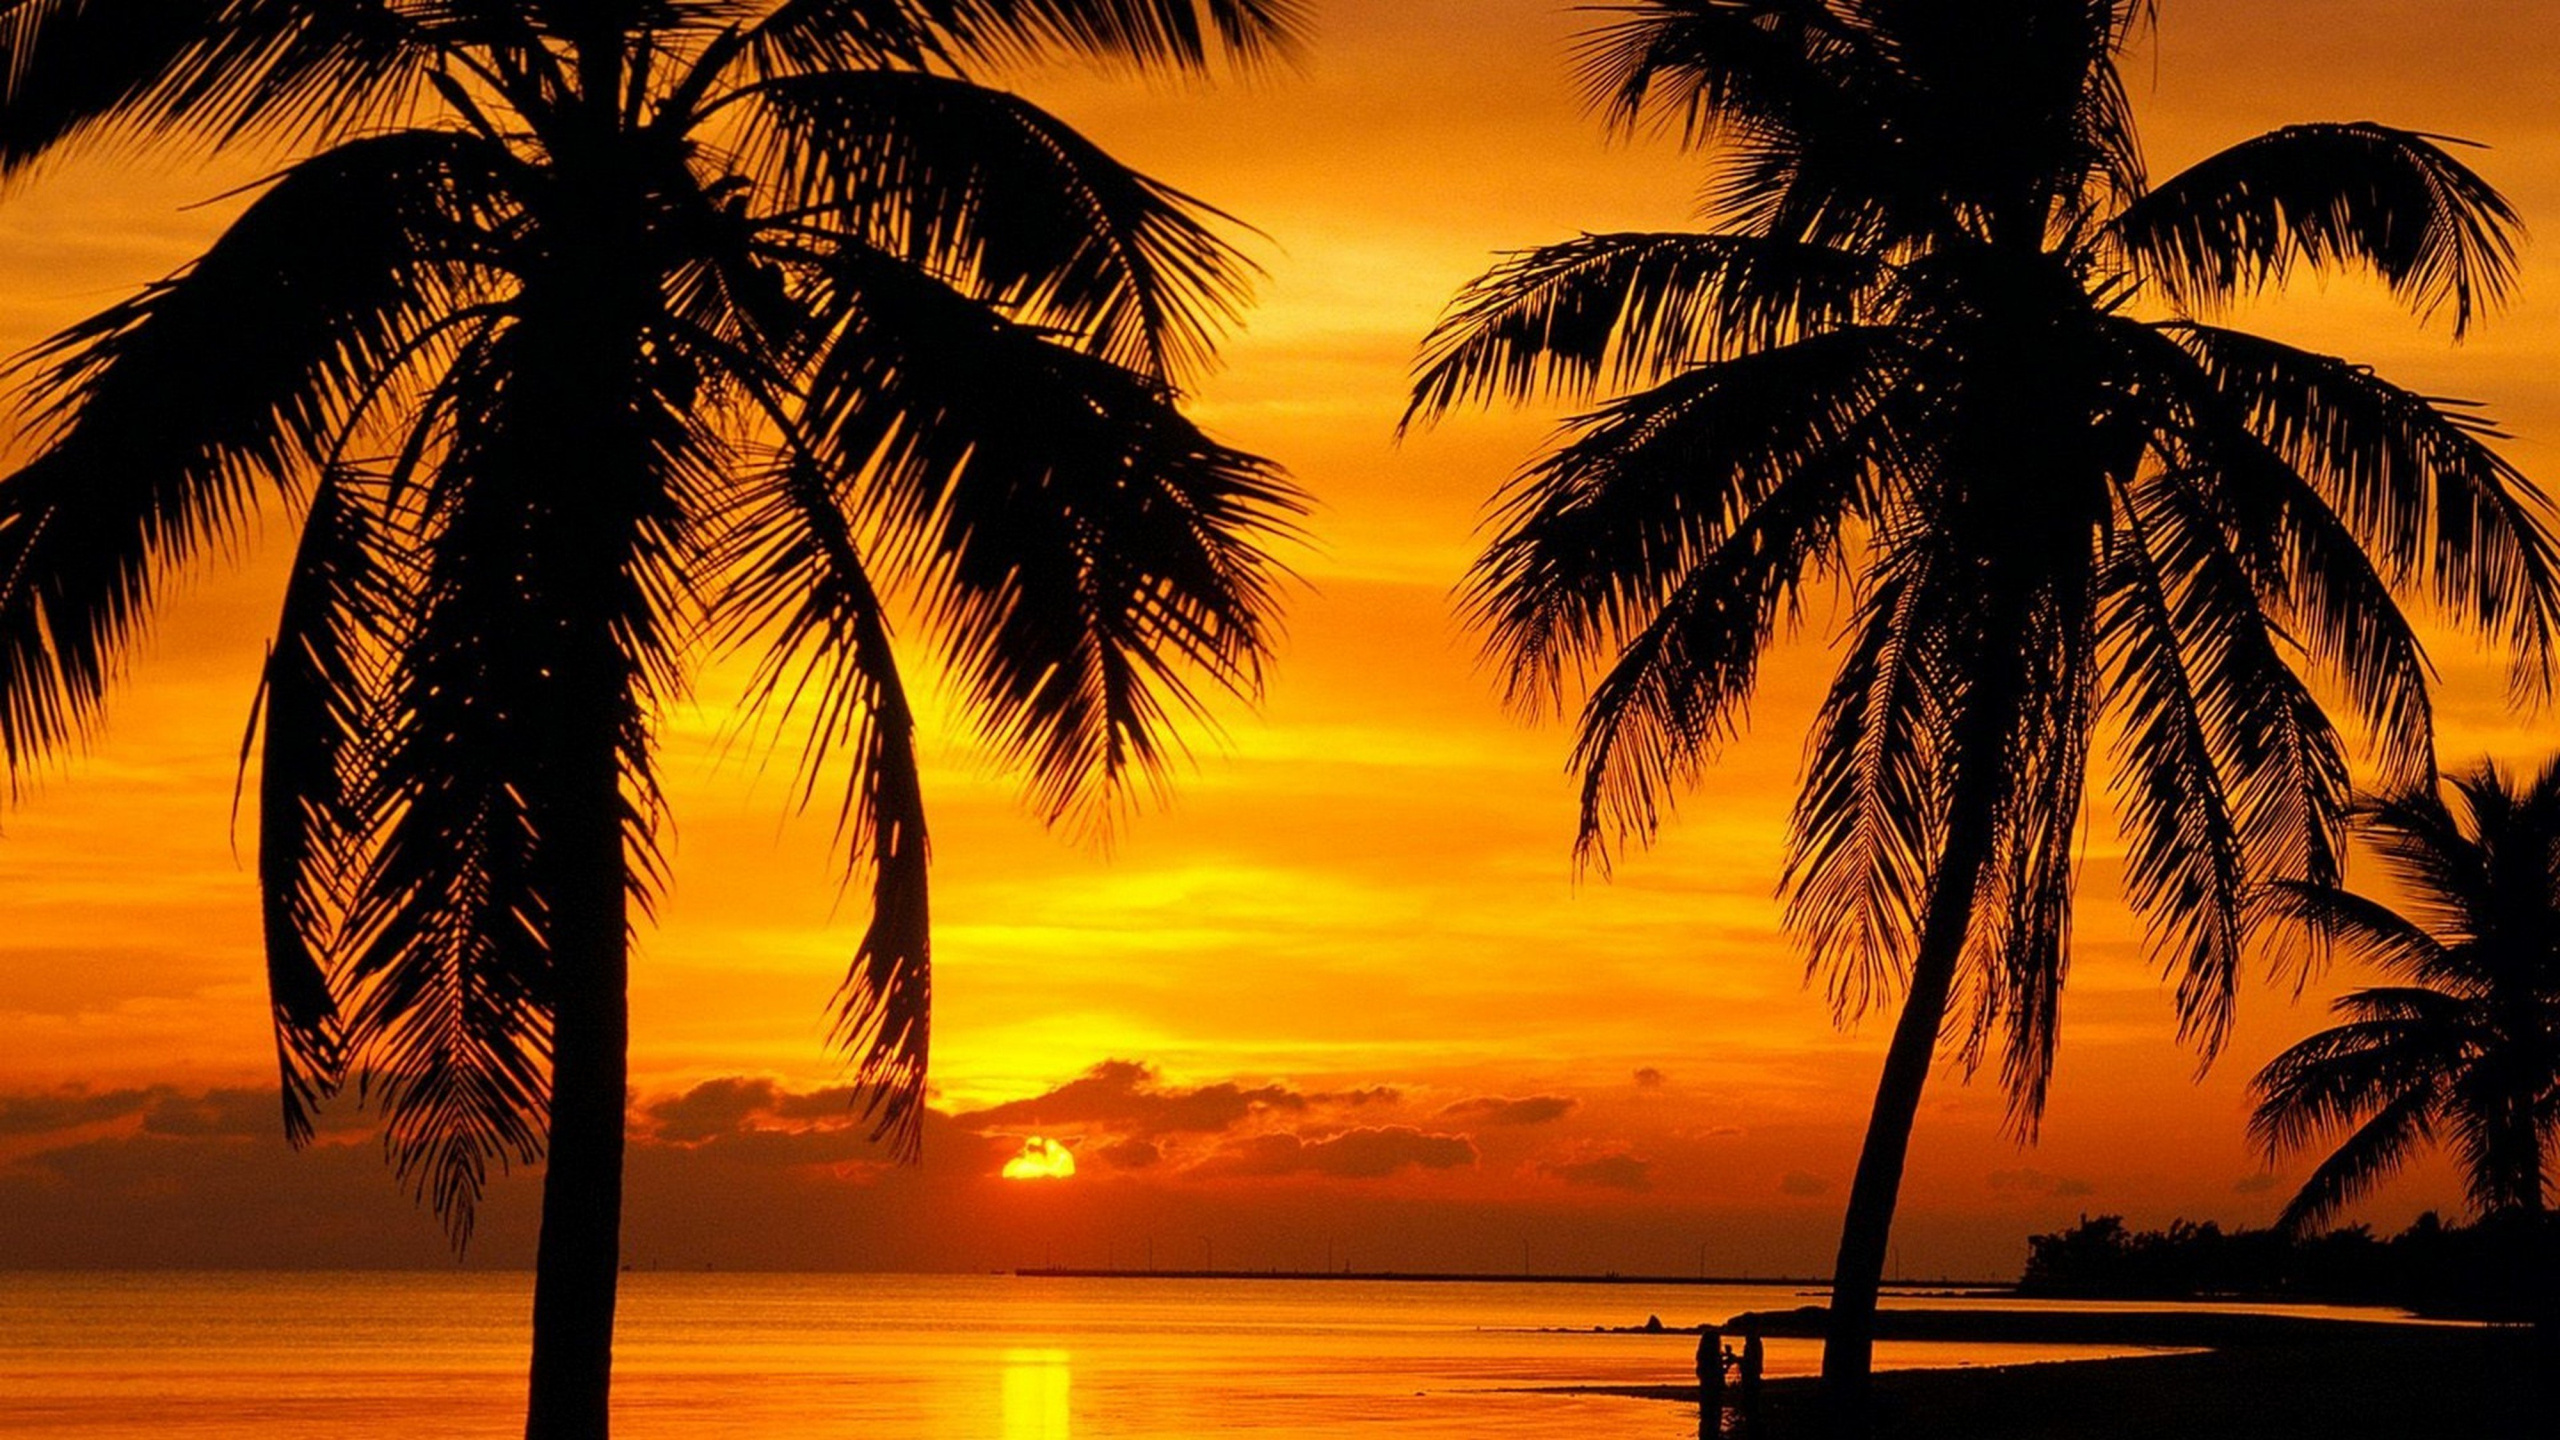 Silhouette of Palm Tree Near Body of Water During Sunset. Wallpaper in 2560x1440 Resolution